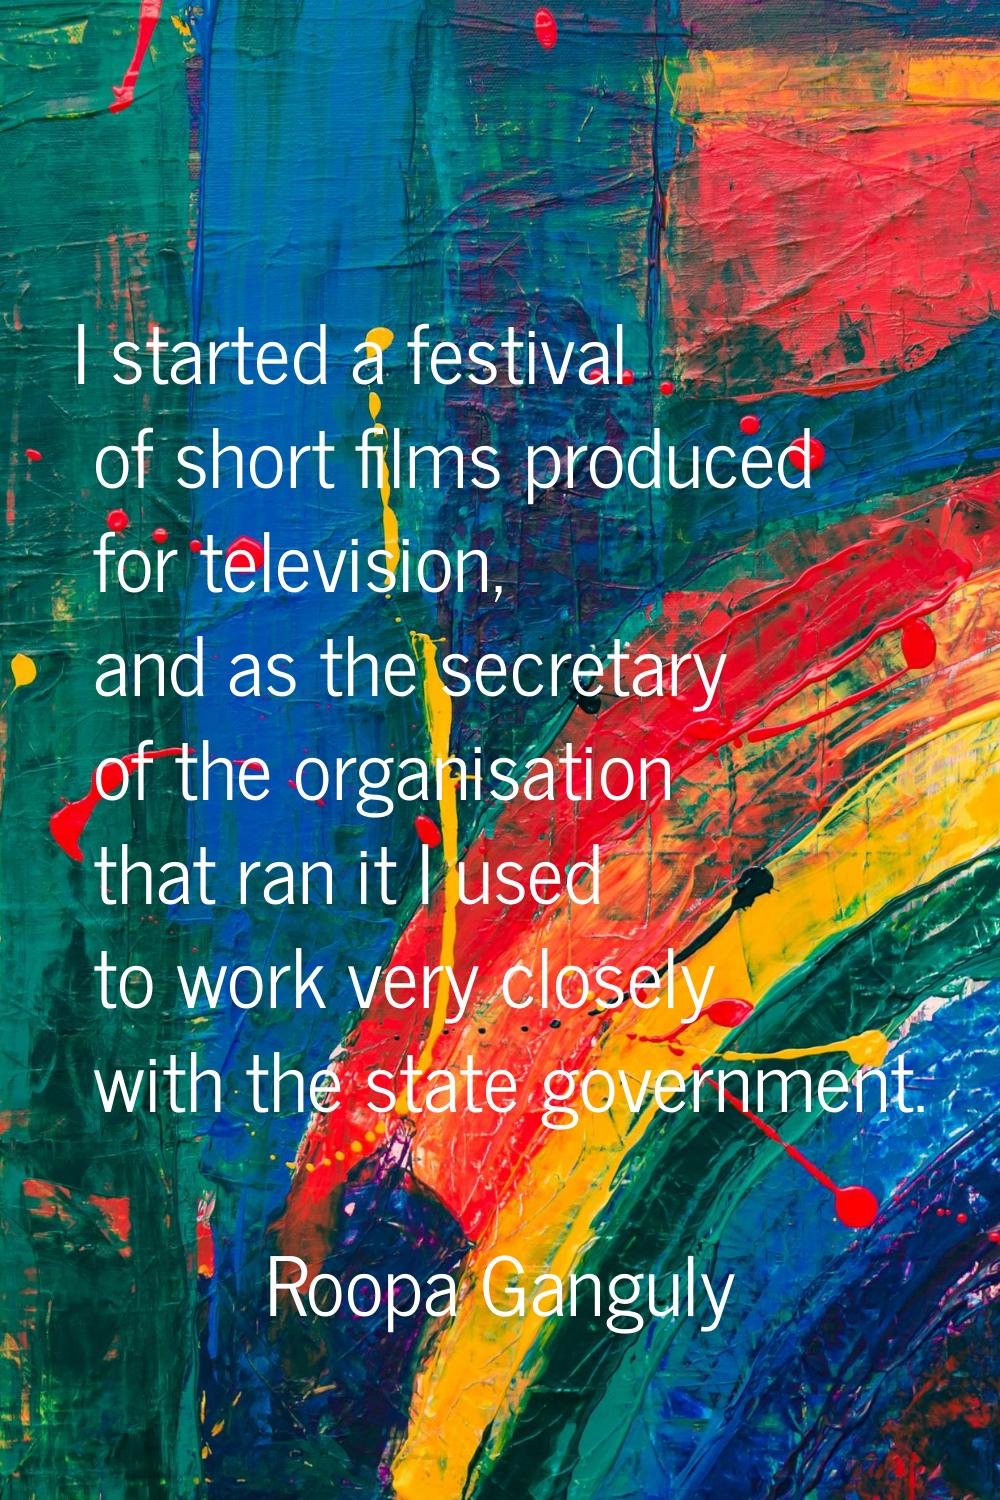 I started a festival of short films produced for television, and as the secretary of the organisati